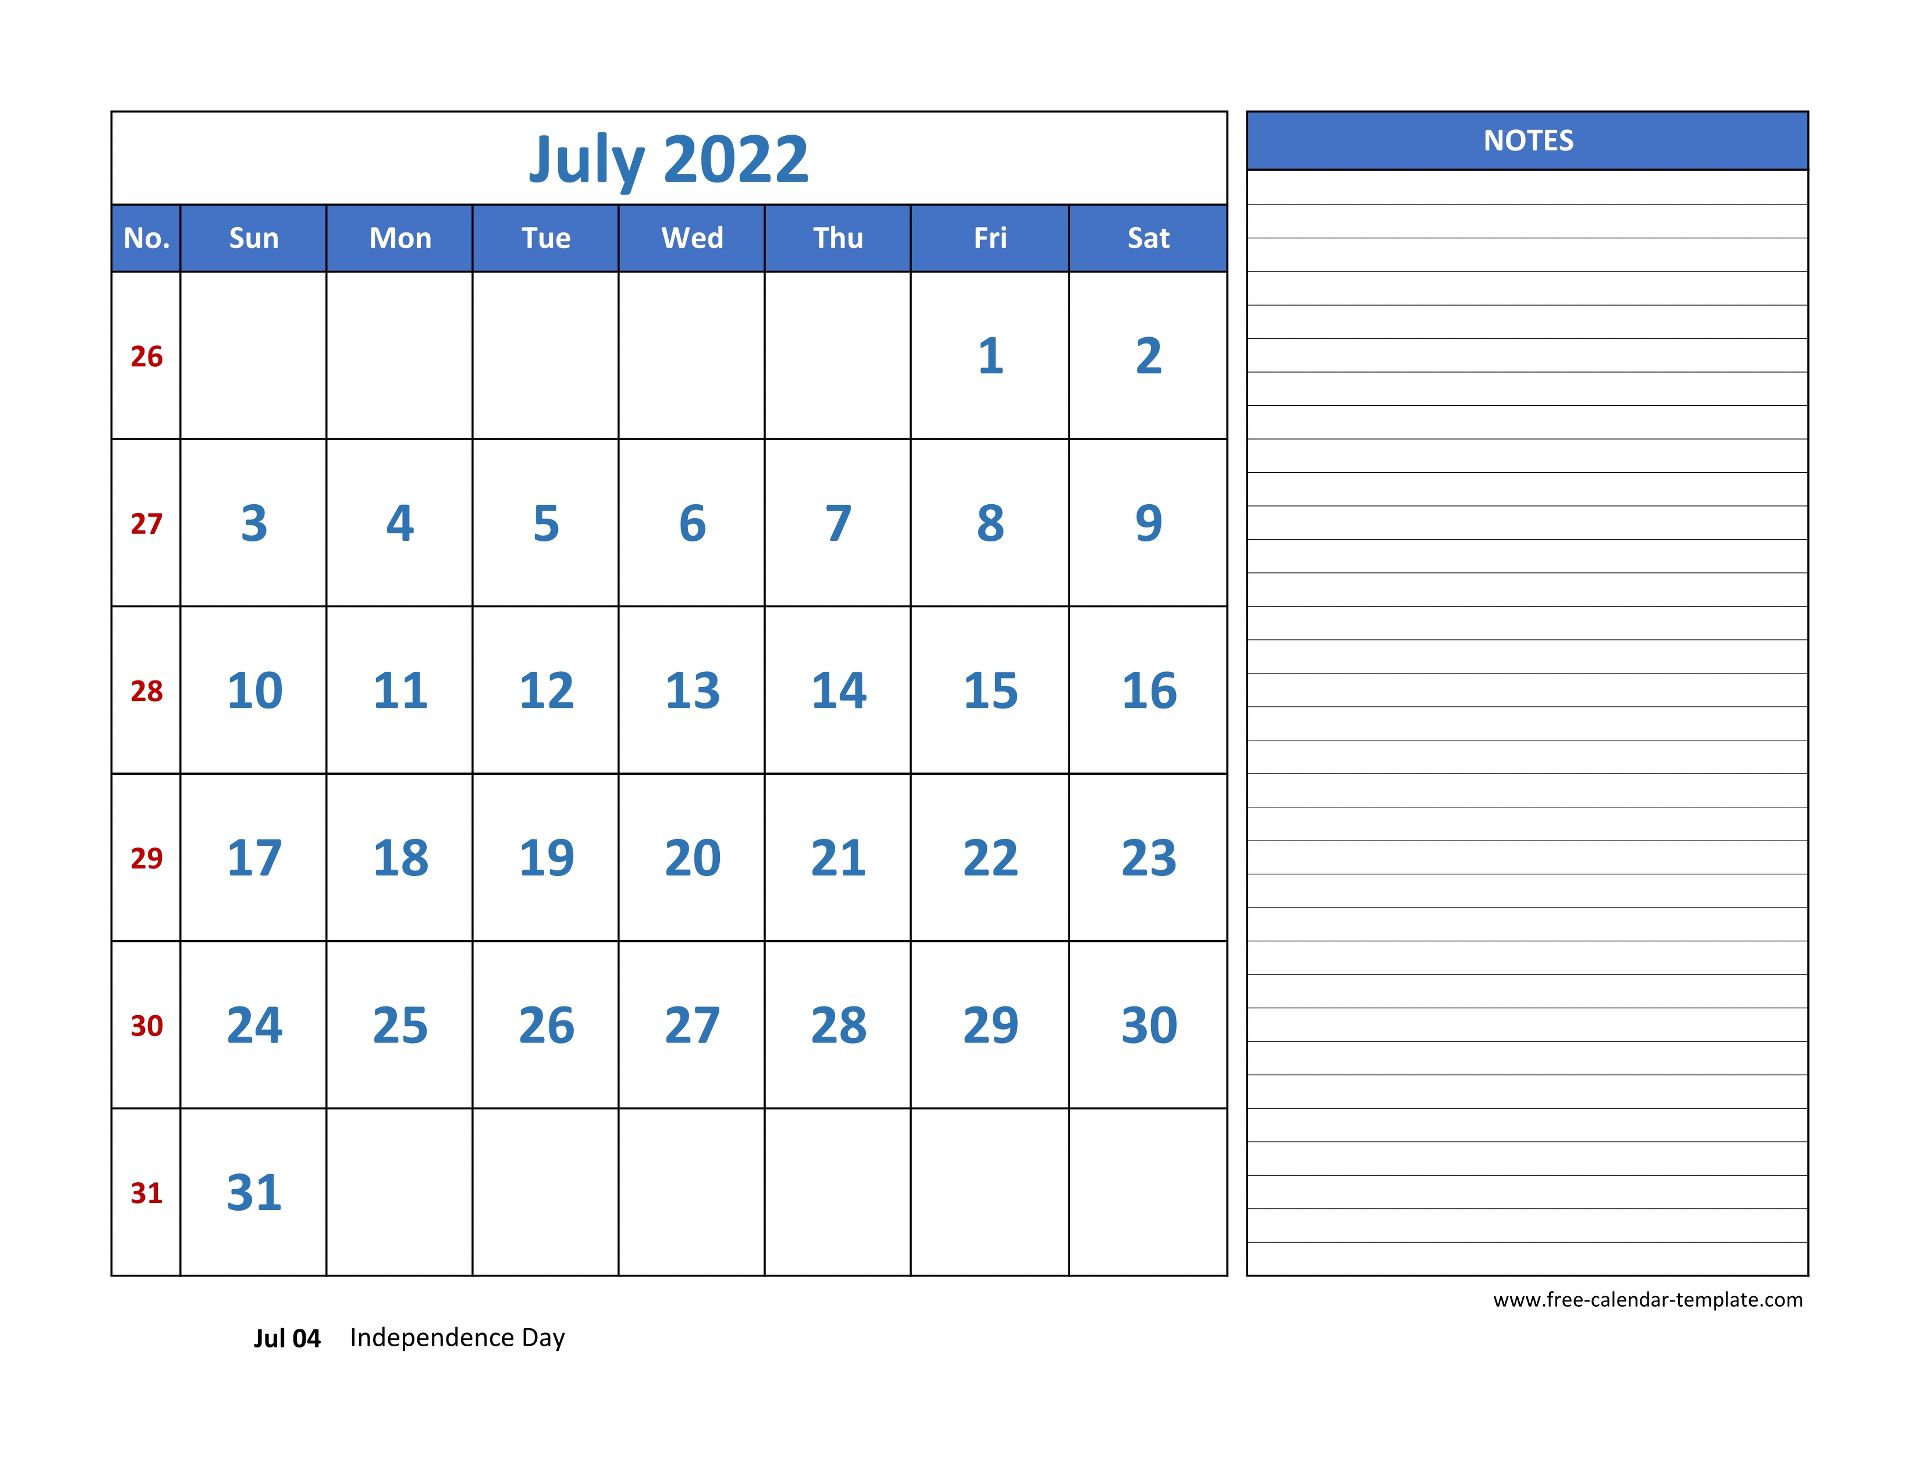 July Calendar 2022 Grid Lines For Holidays And Notes Horizontal